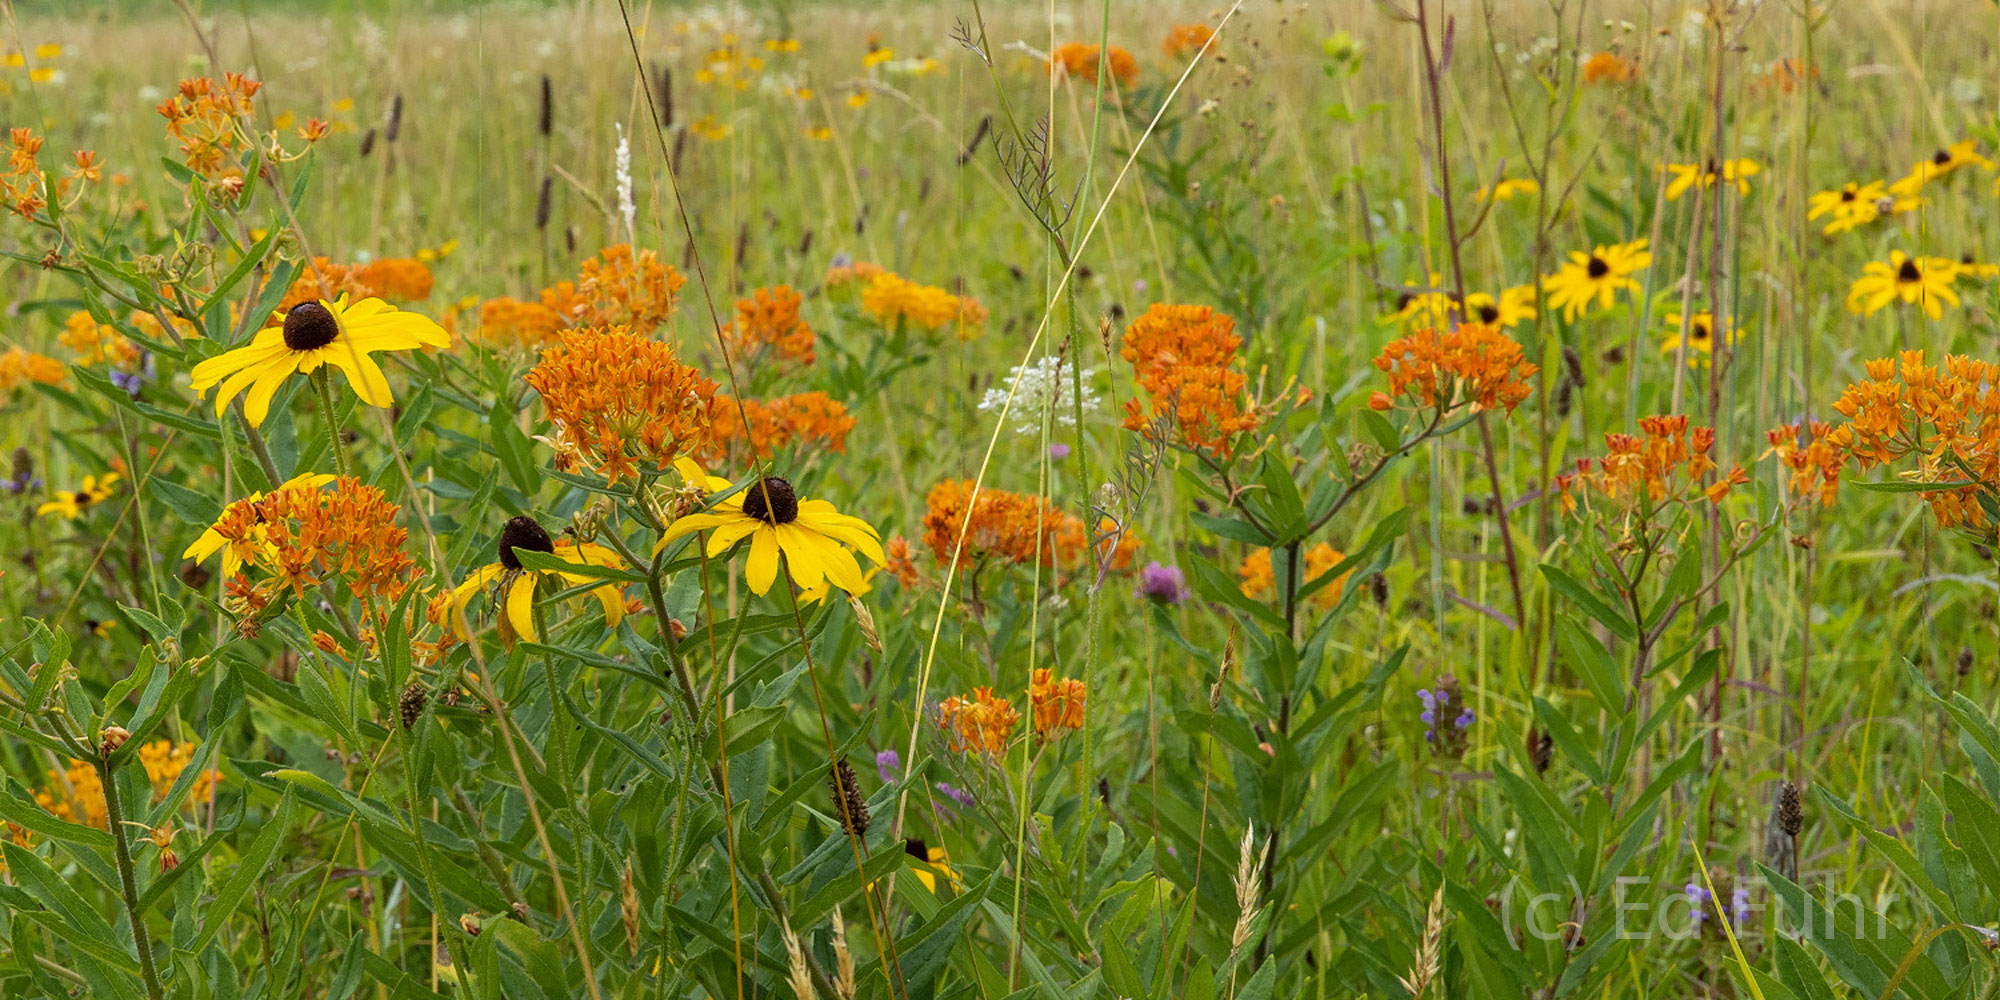 Butterfly Weed, Rudbeckia, and other wildflowers color a Cades Cove meadow.